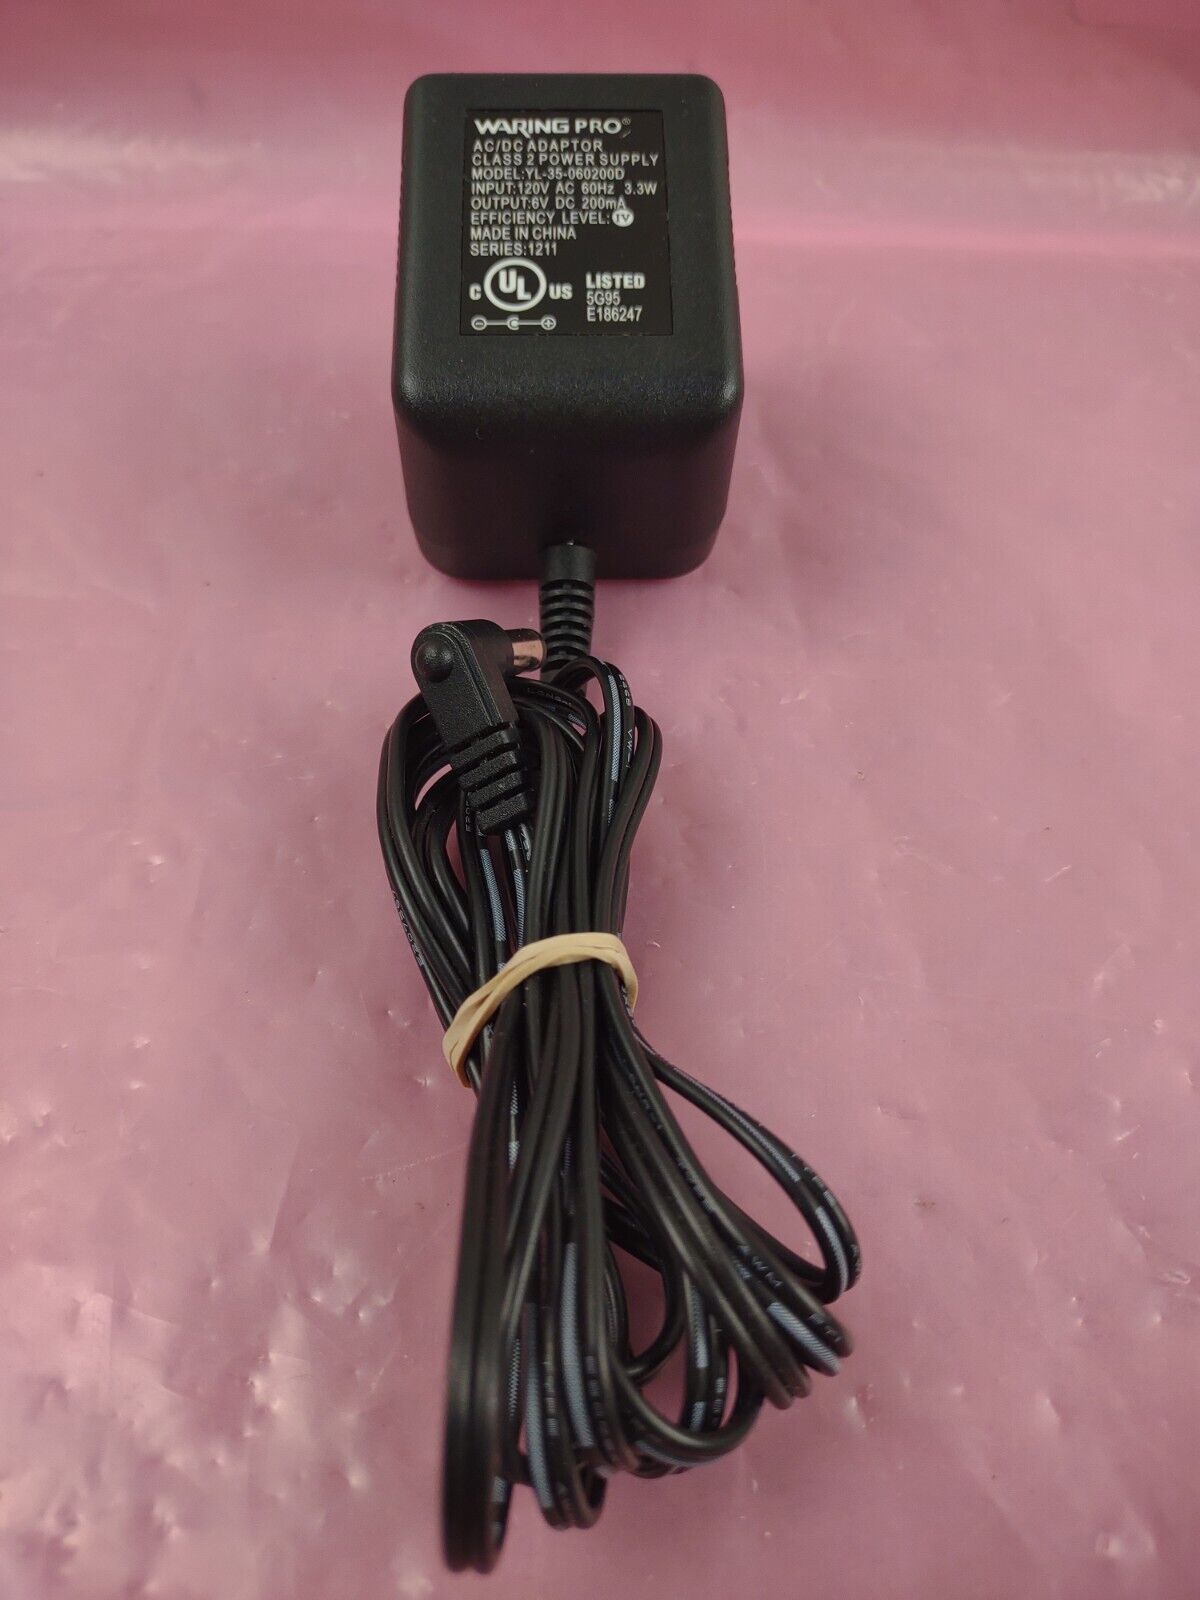 Waring Pro Power Supply Adapter Model: YL-35-060200D Output: 6V DC 200mA Type: AC/DC Adapter Output Voltage: 6 V B - Click Image to Close